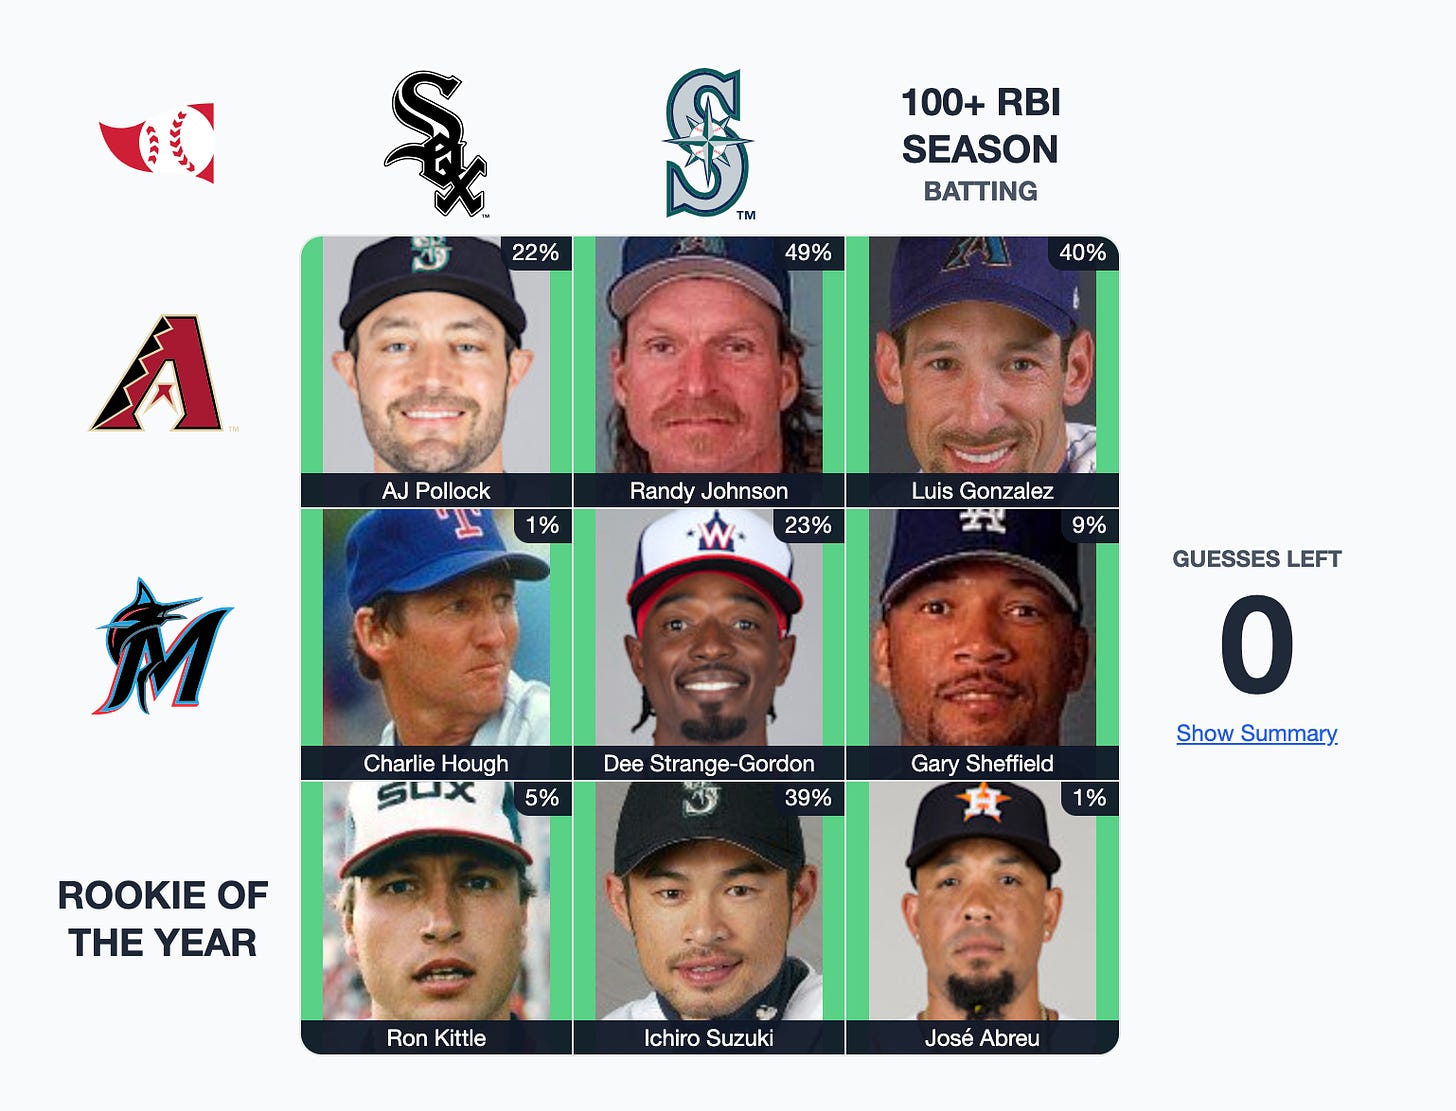 Immaculate grid results with the options being Diamondbacks, Marlins, and Rookie of the Year on the Y axis and the White Sox, Mariners, and 100+ RBI season on the X axis